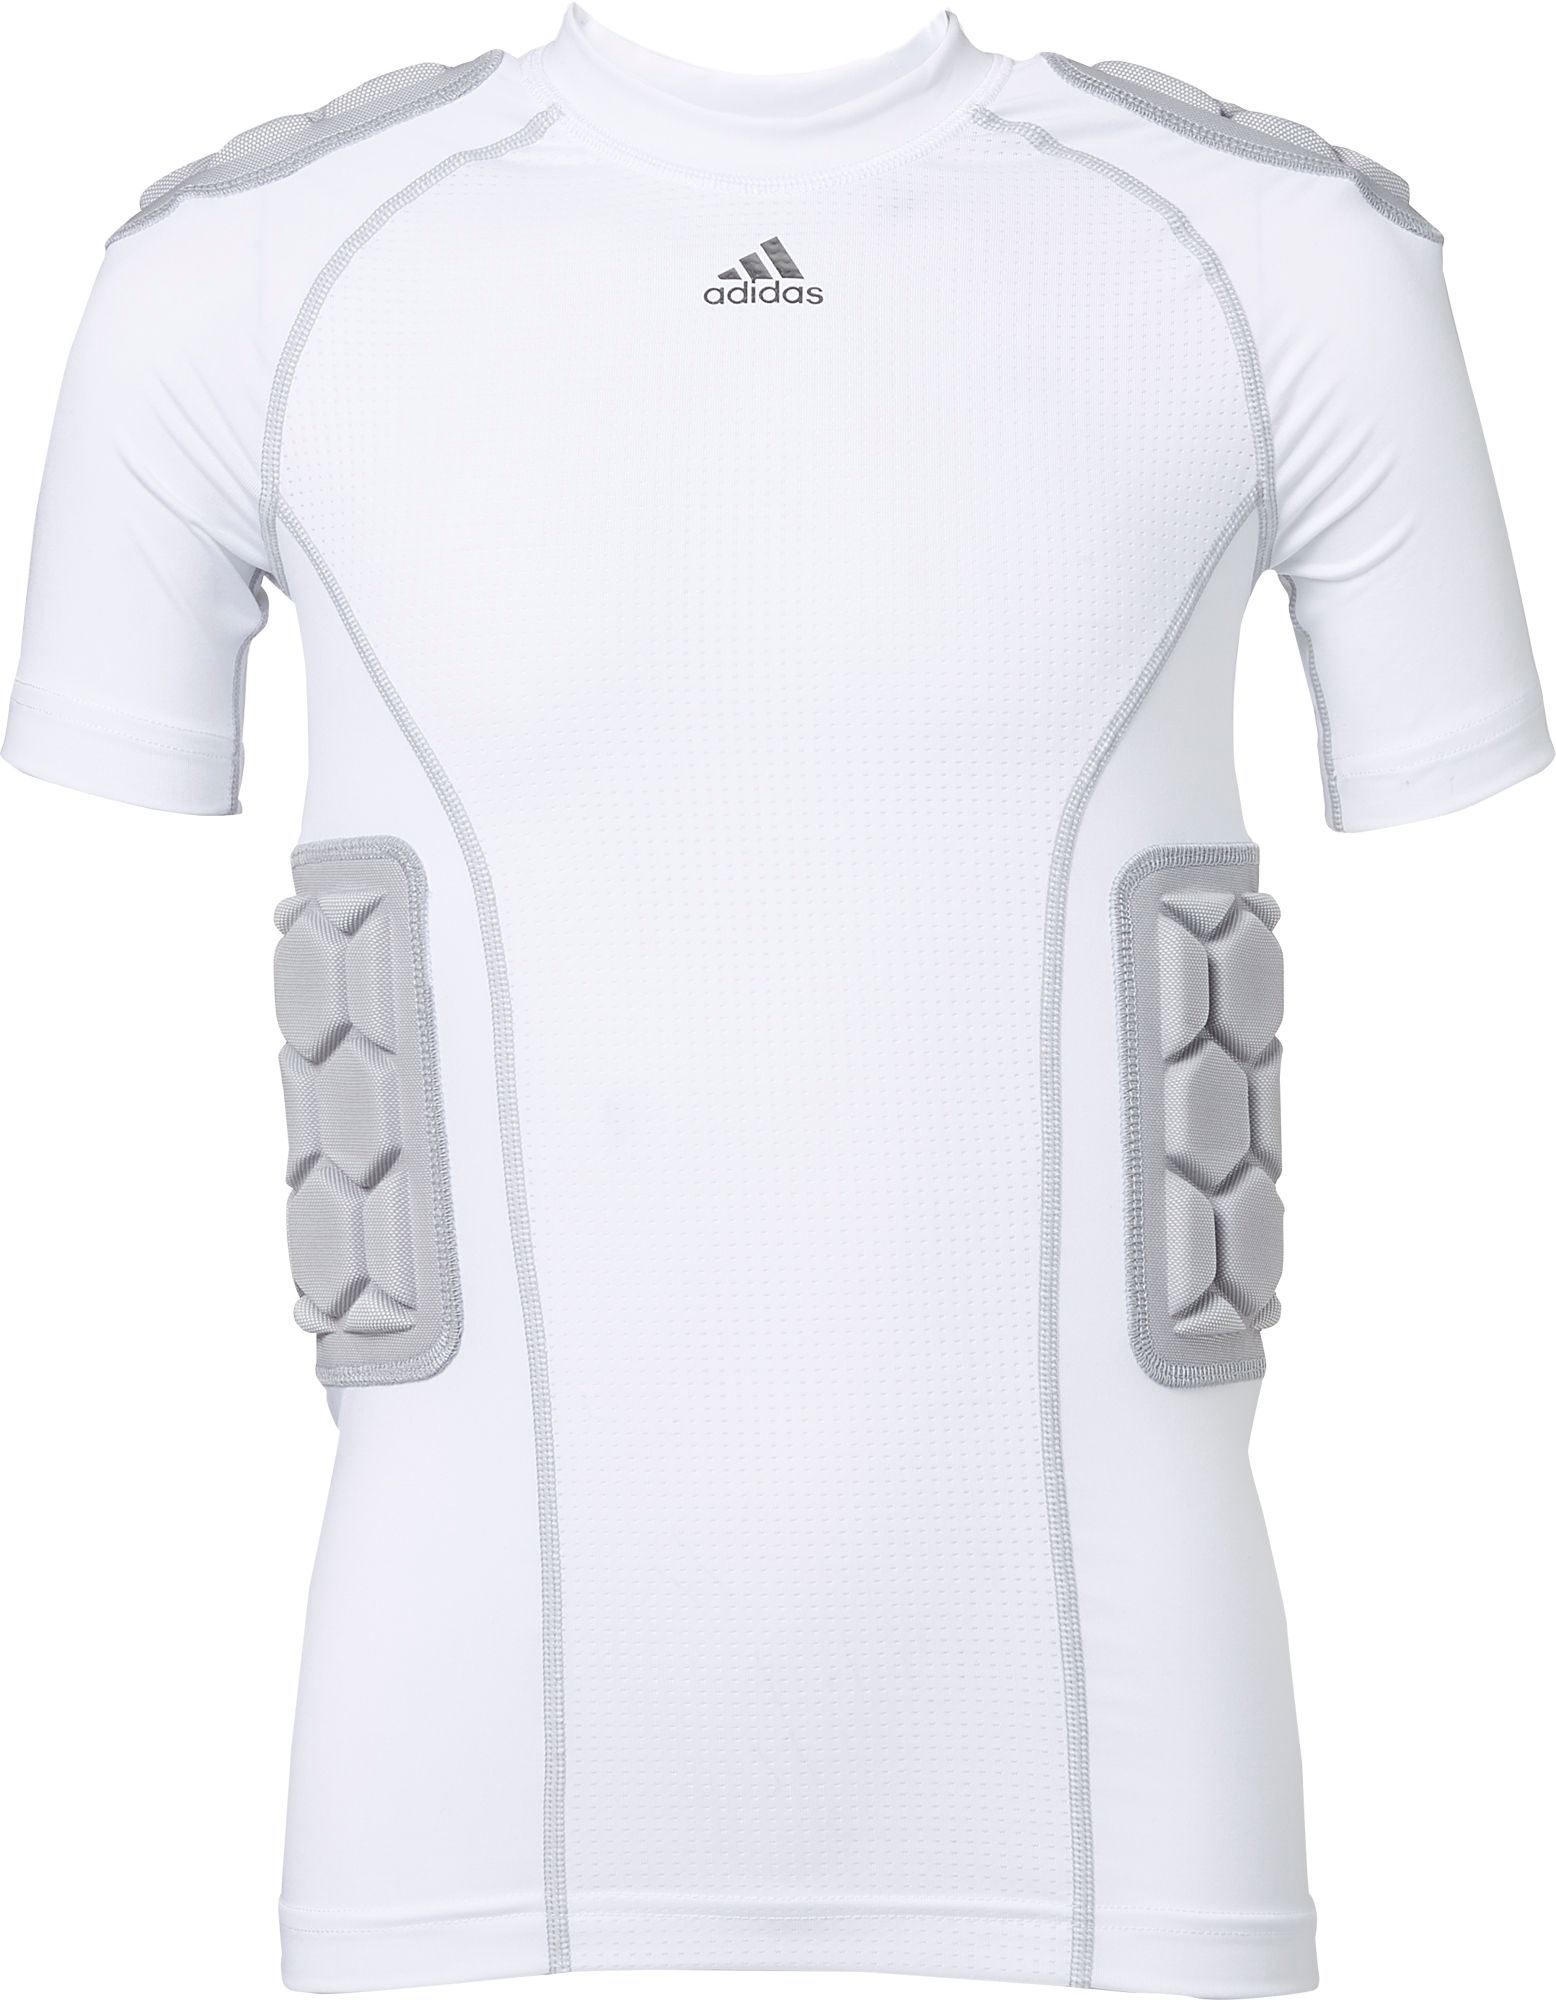 under armour youth padded football compression shirt